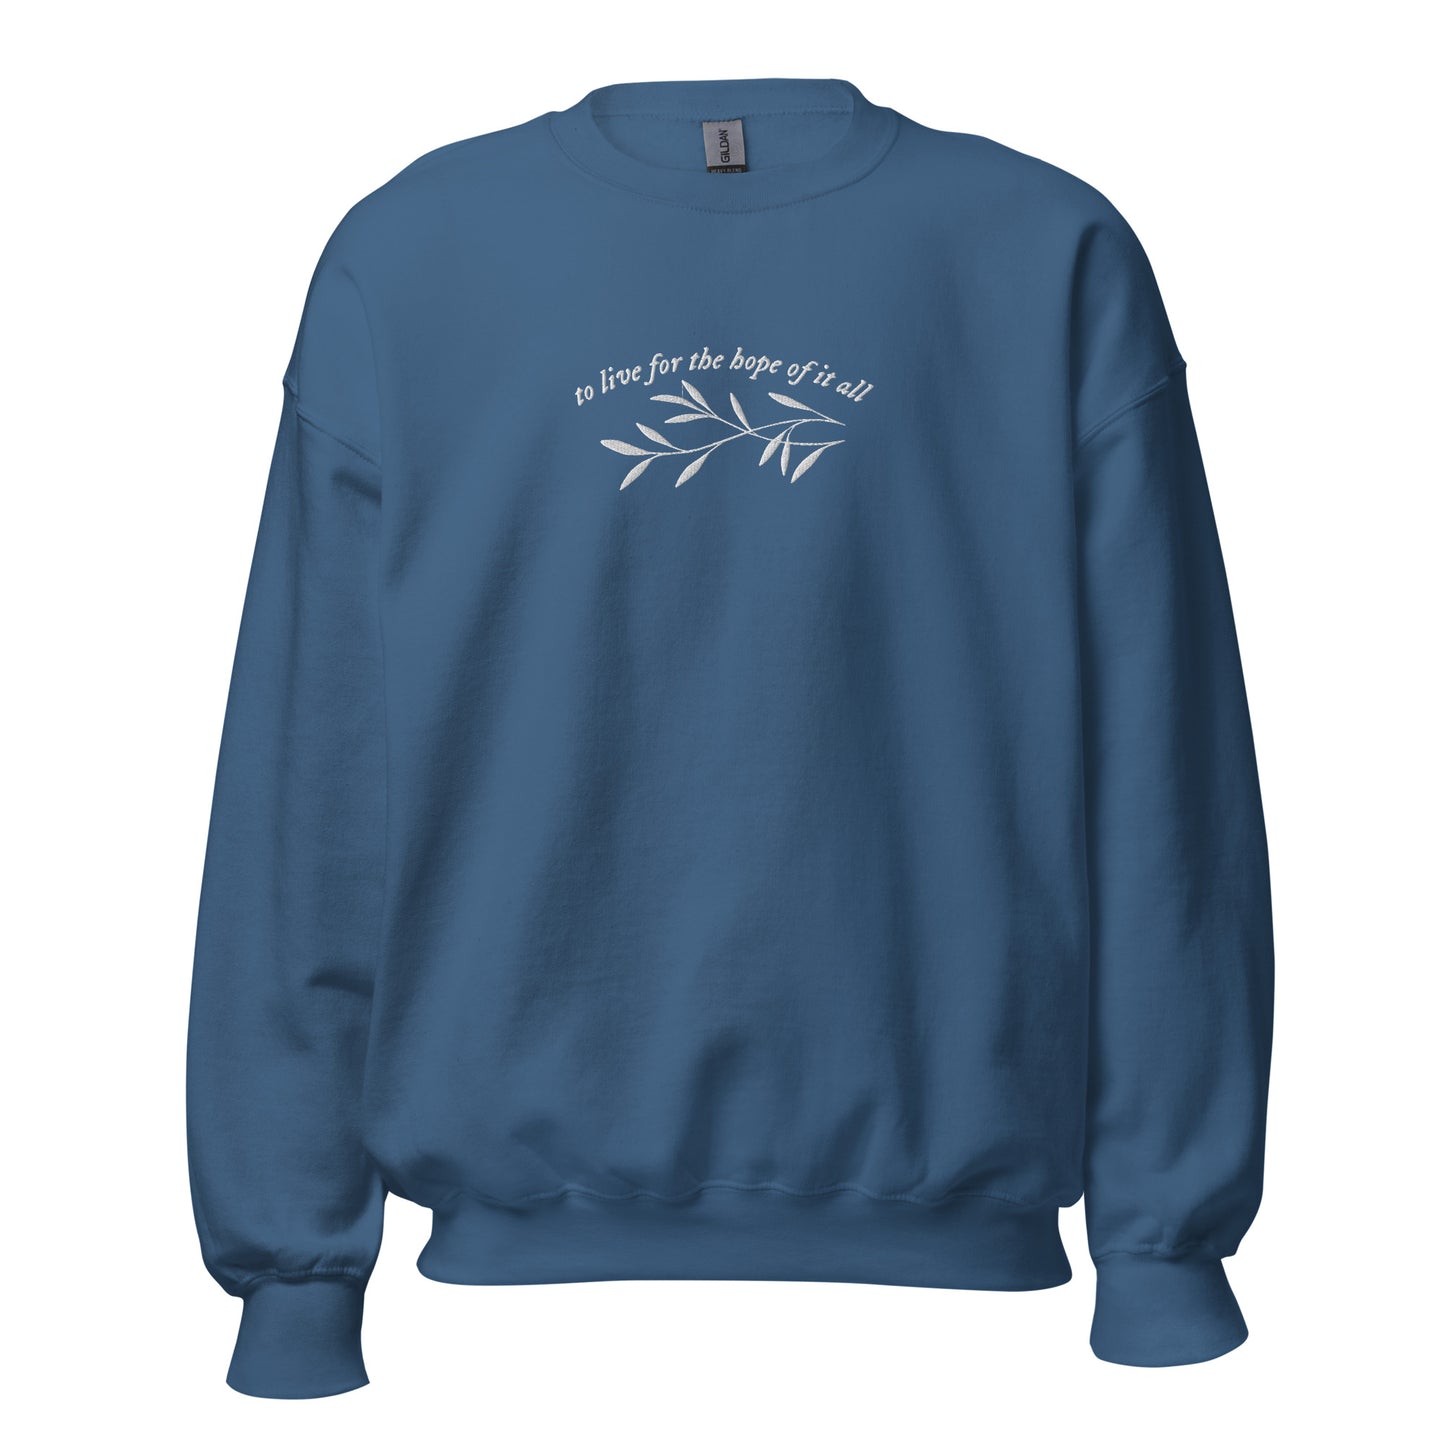 the hope of it all embroidered crewneck